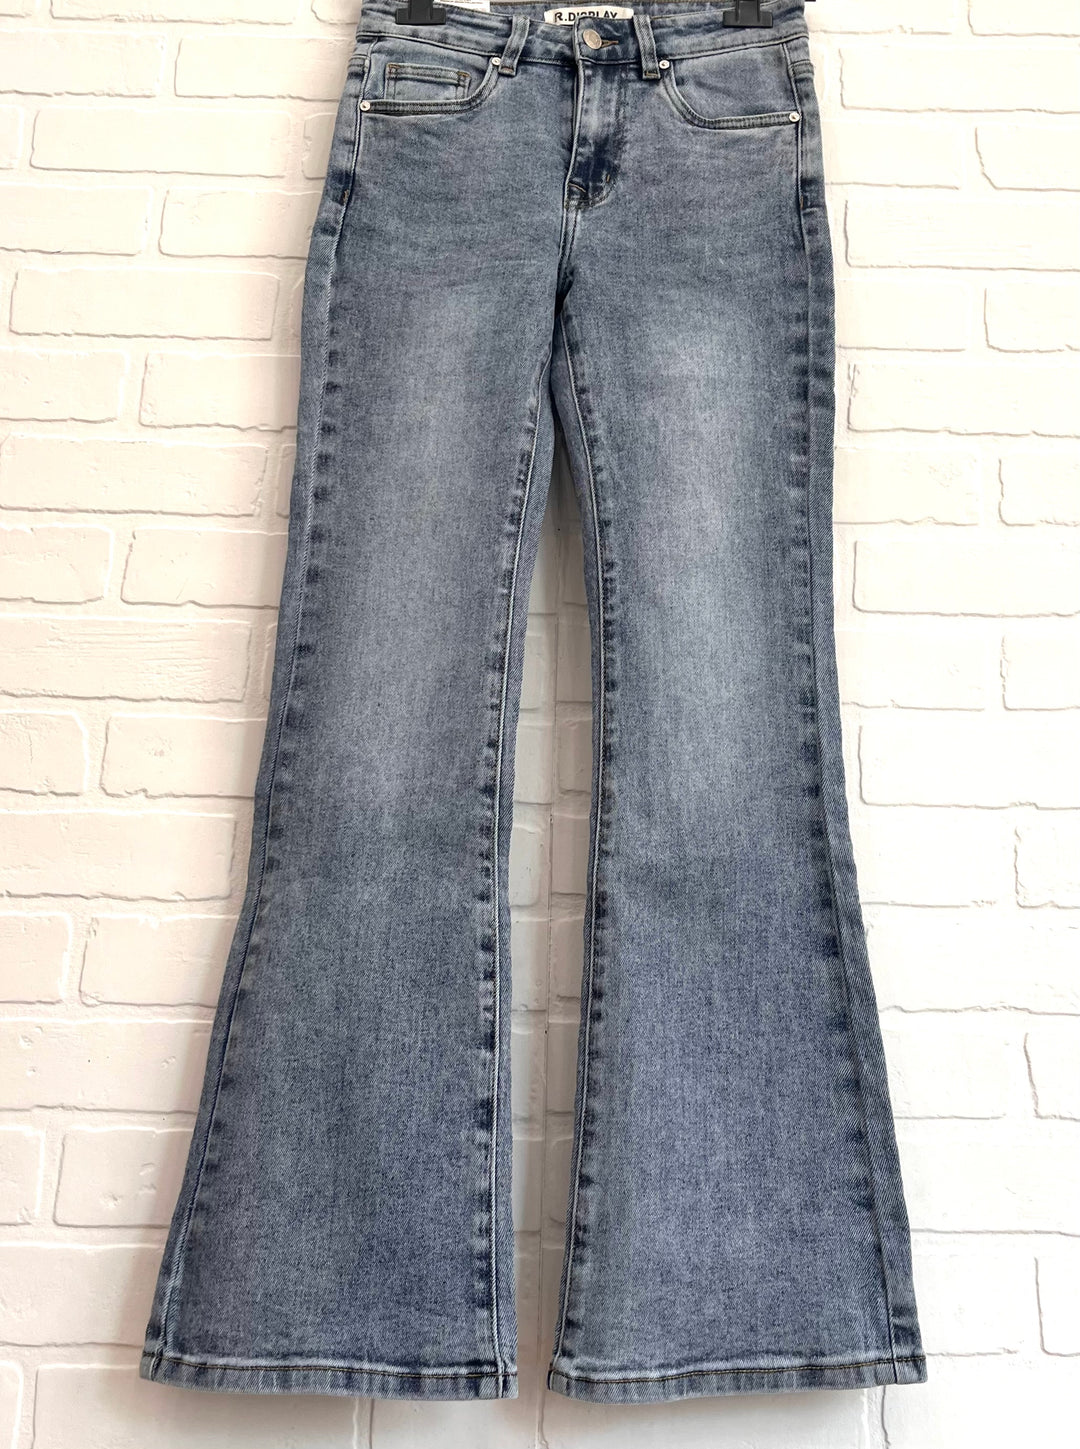 Display Flare Jeans